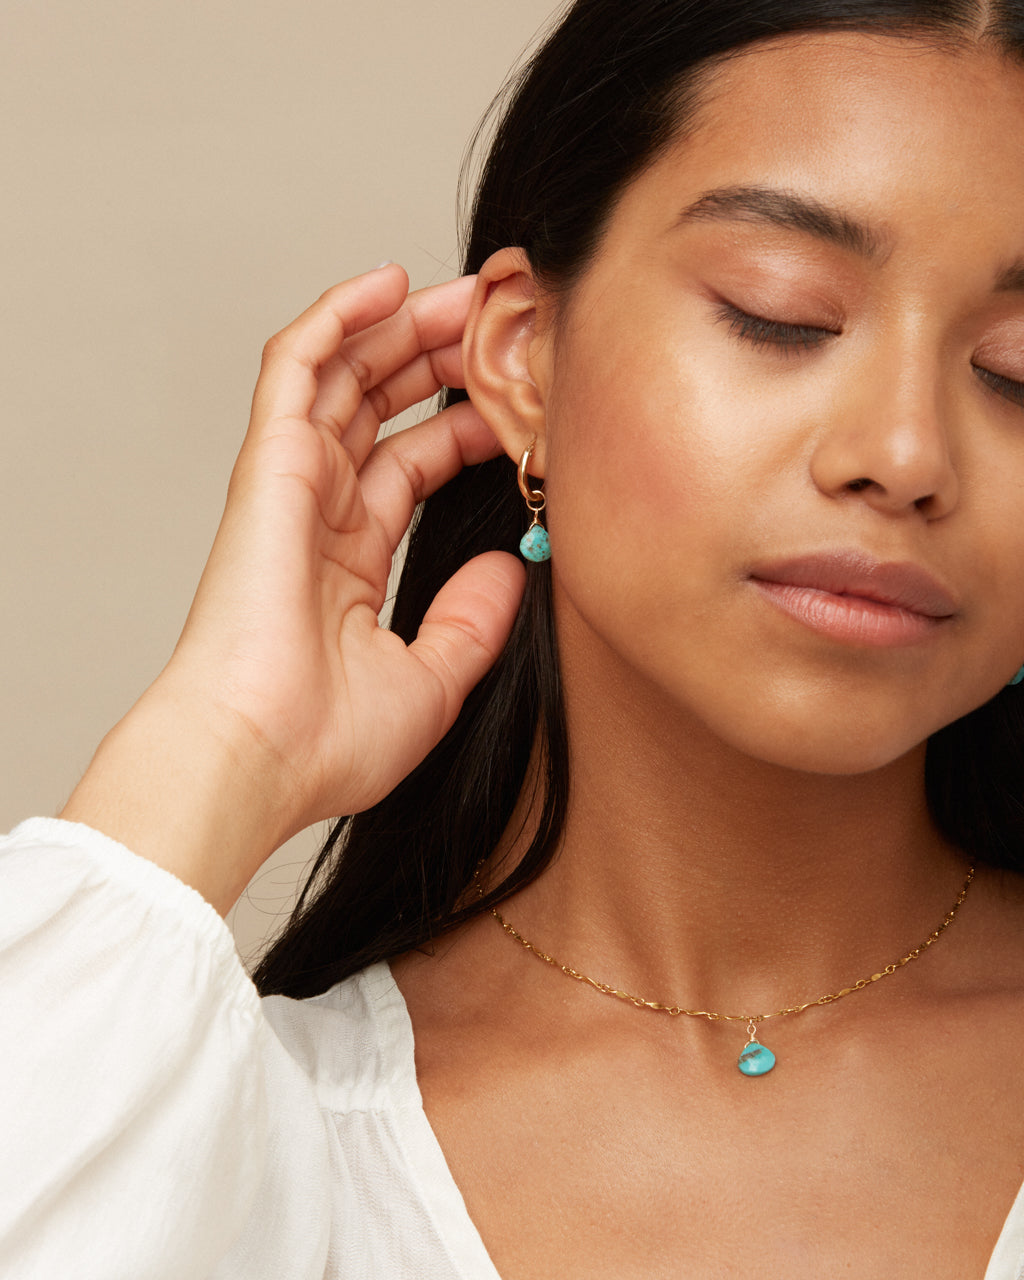 14K Gold Filled Turquoise Hoop Earrings | Inspiration Her Jewellery